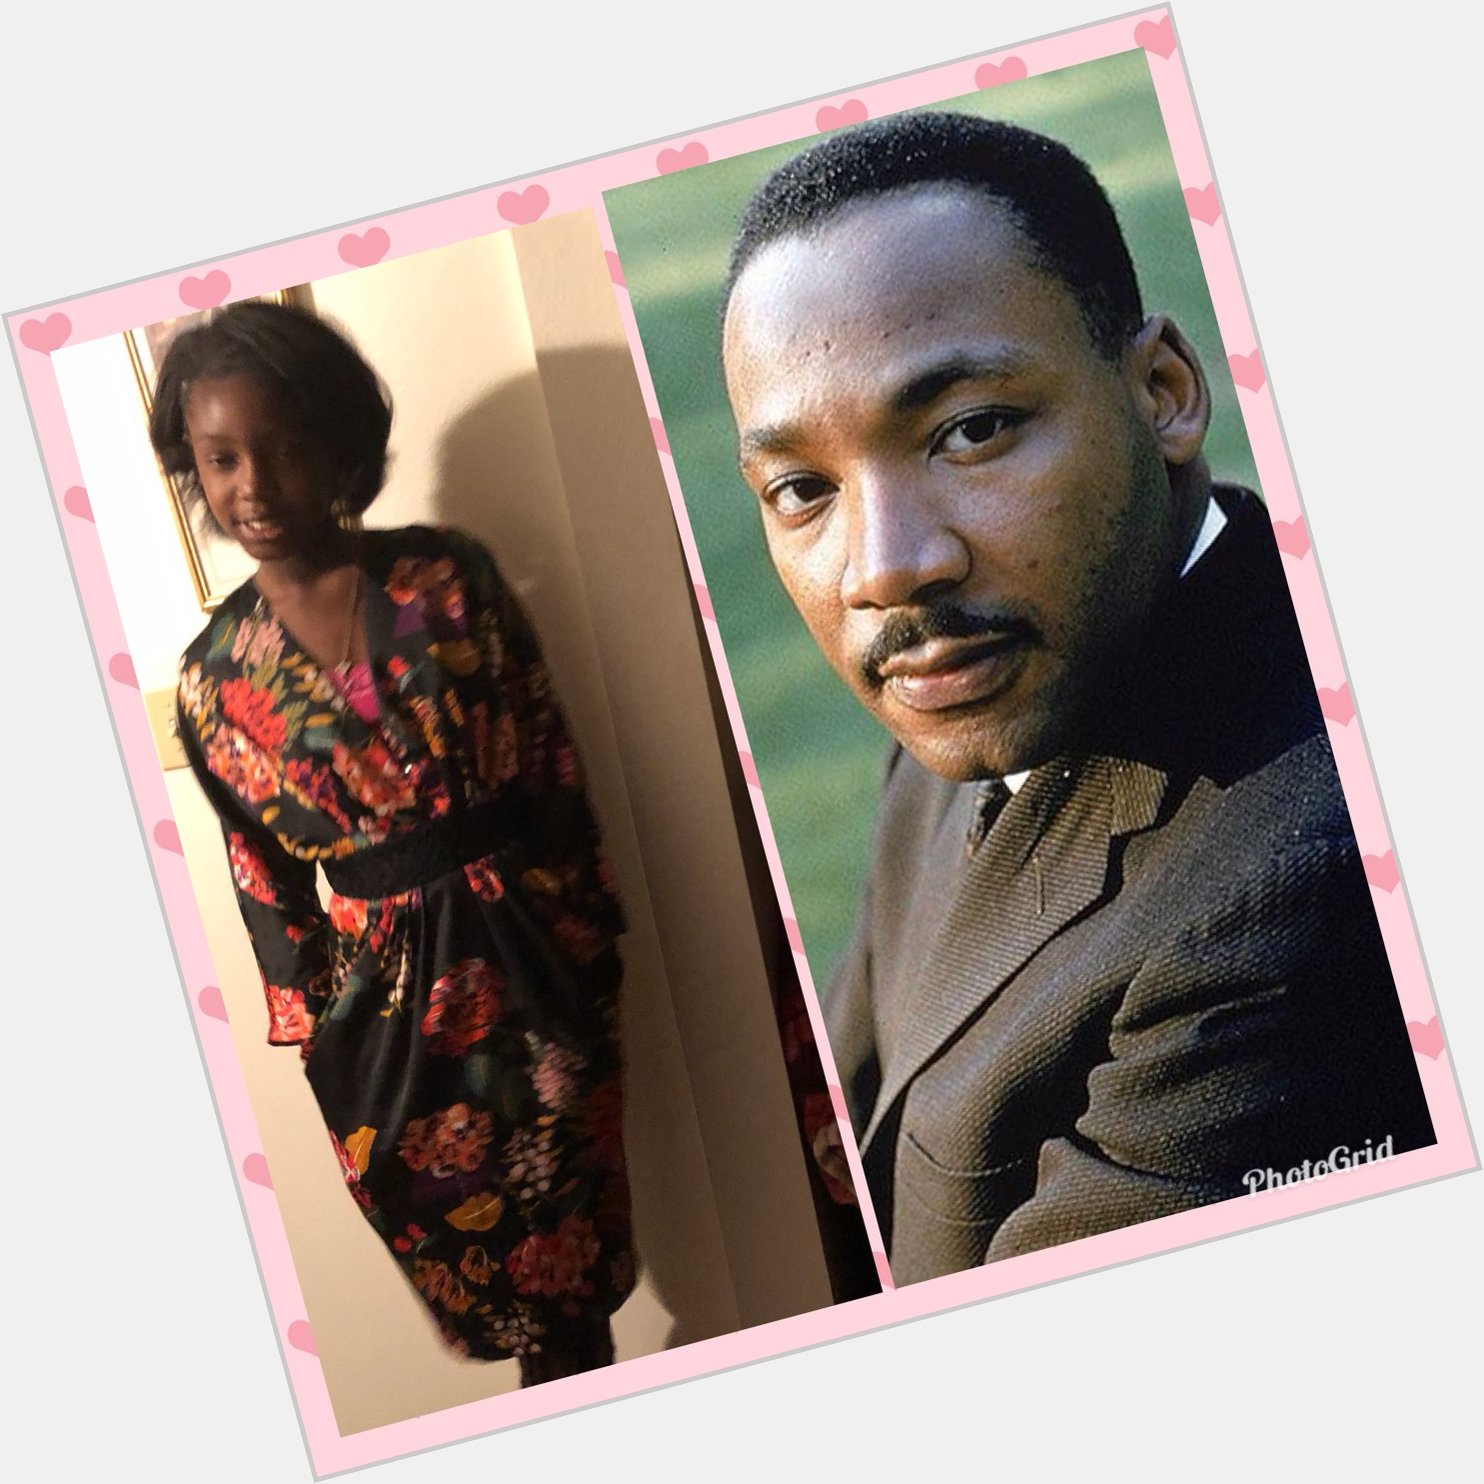 Happy birthday to my one and only baby girl Ariel Essie Mitchell and the Rev. Dr. Martin Luther King Jr.          